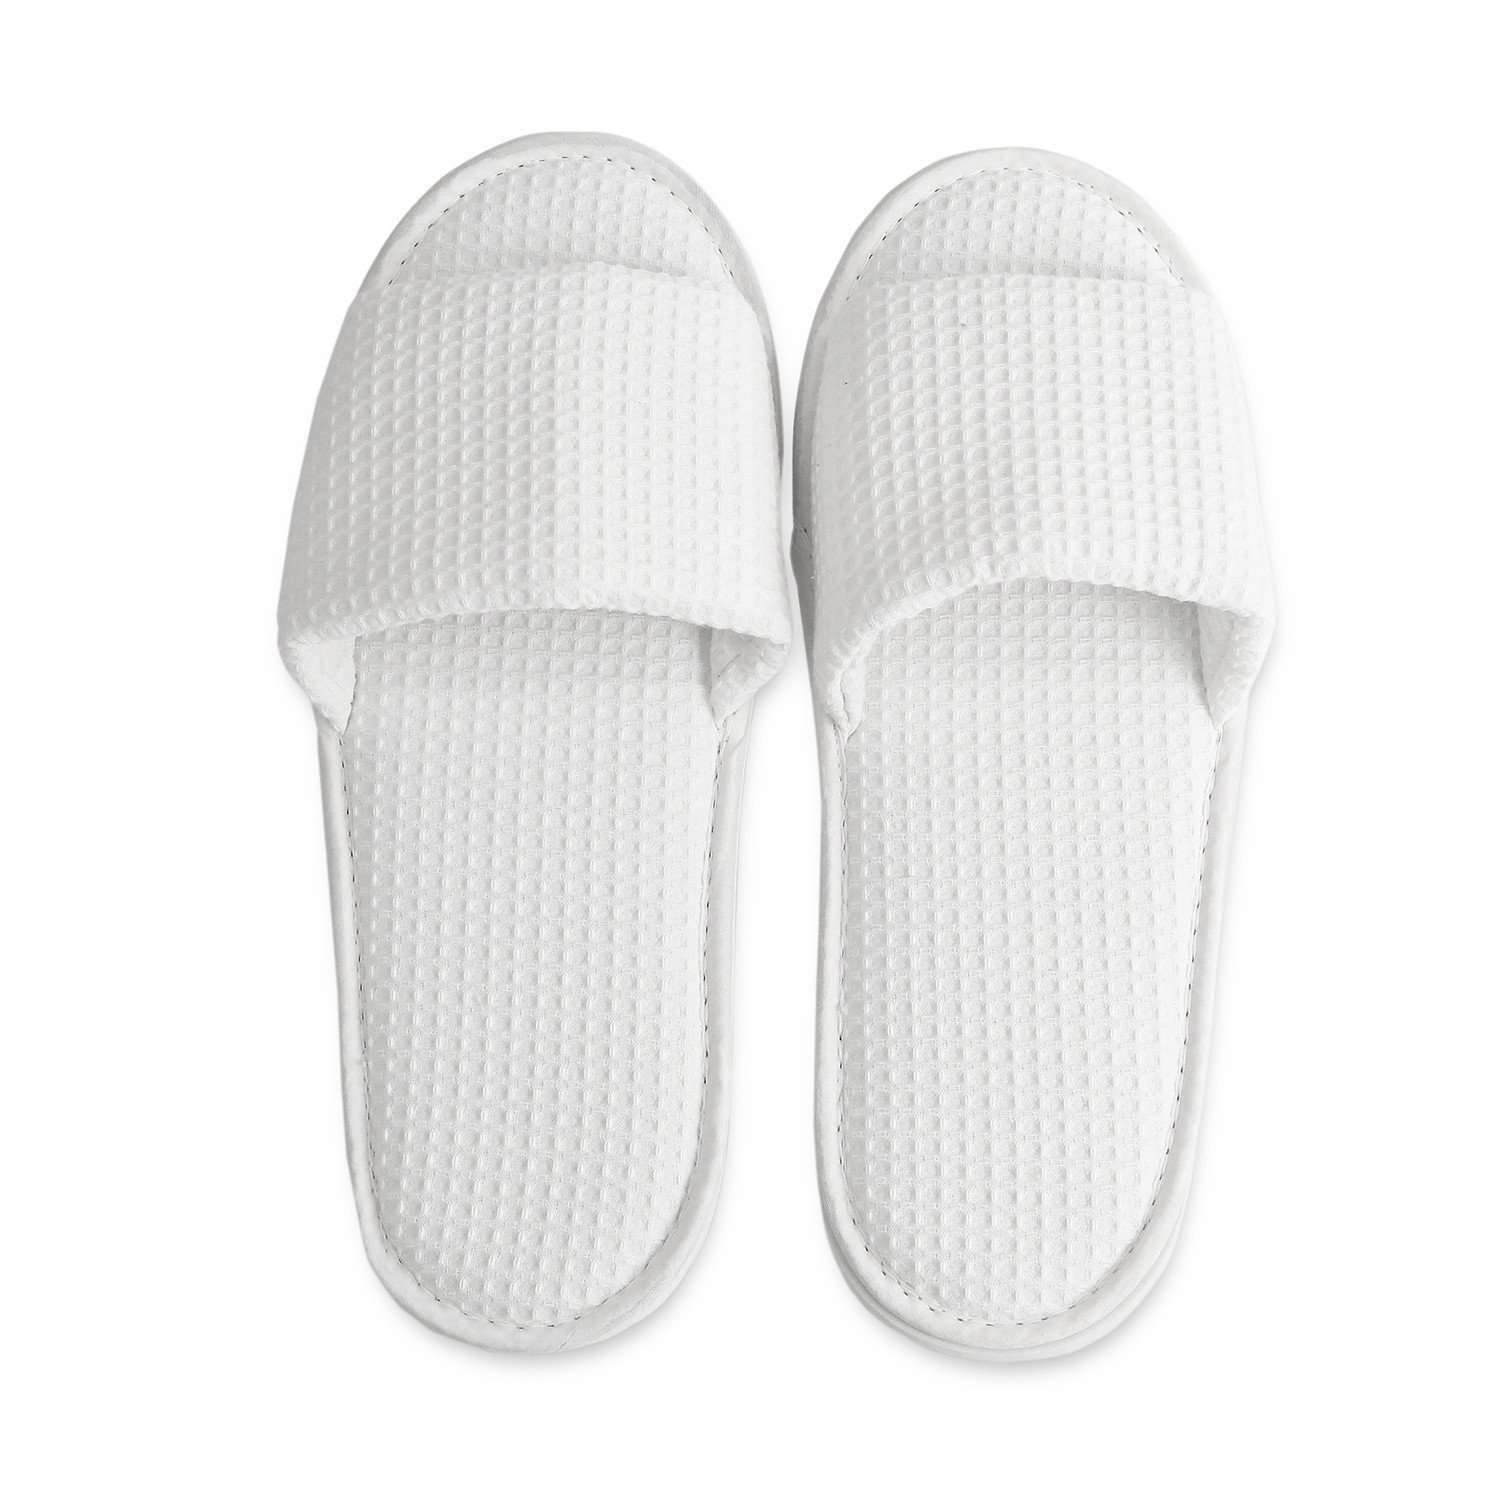 Lakeview Waffle Spa Slippers